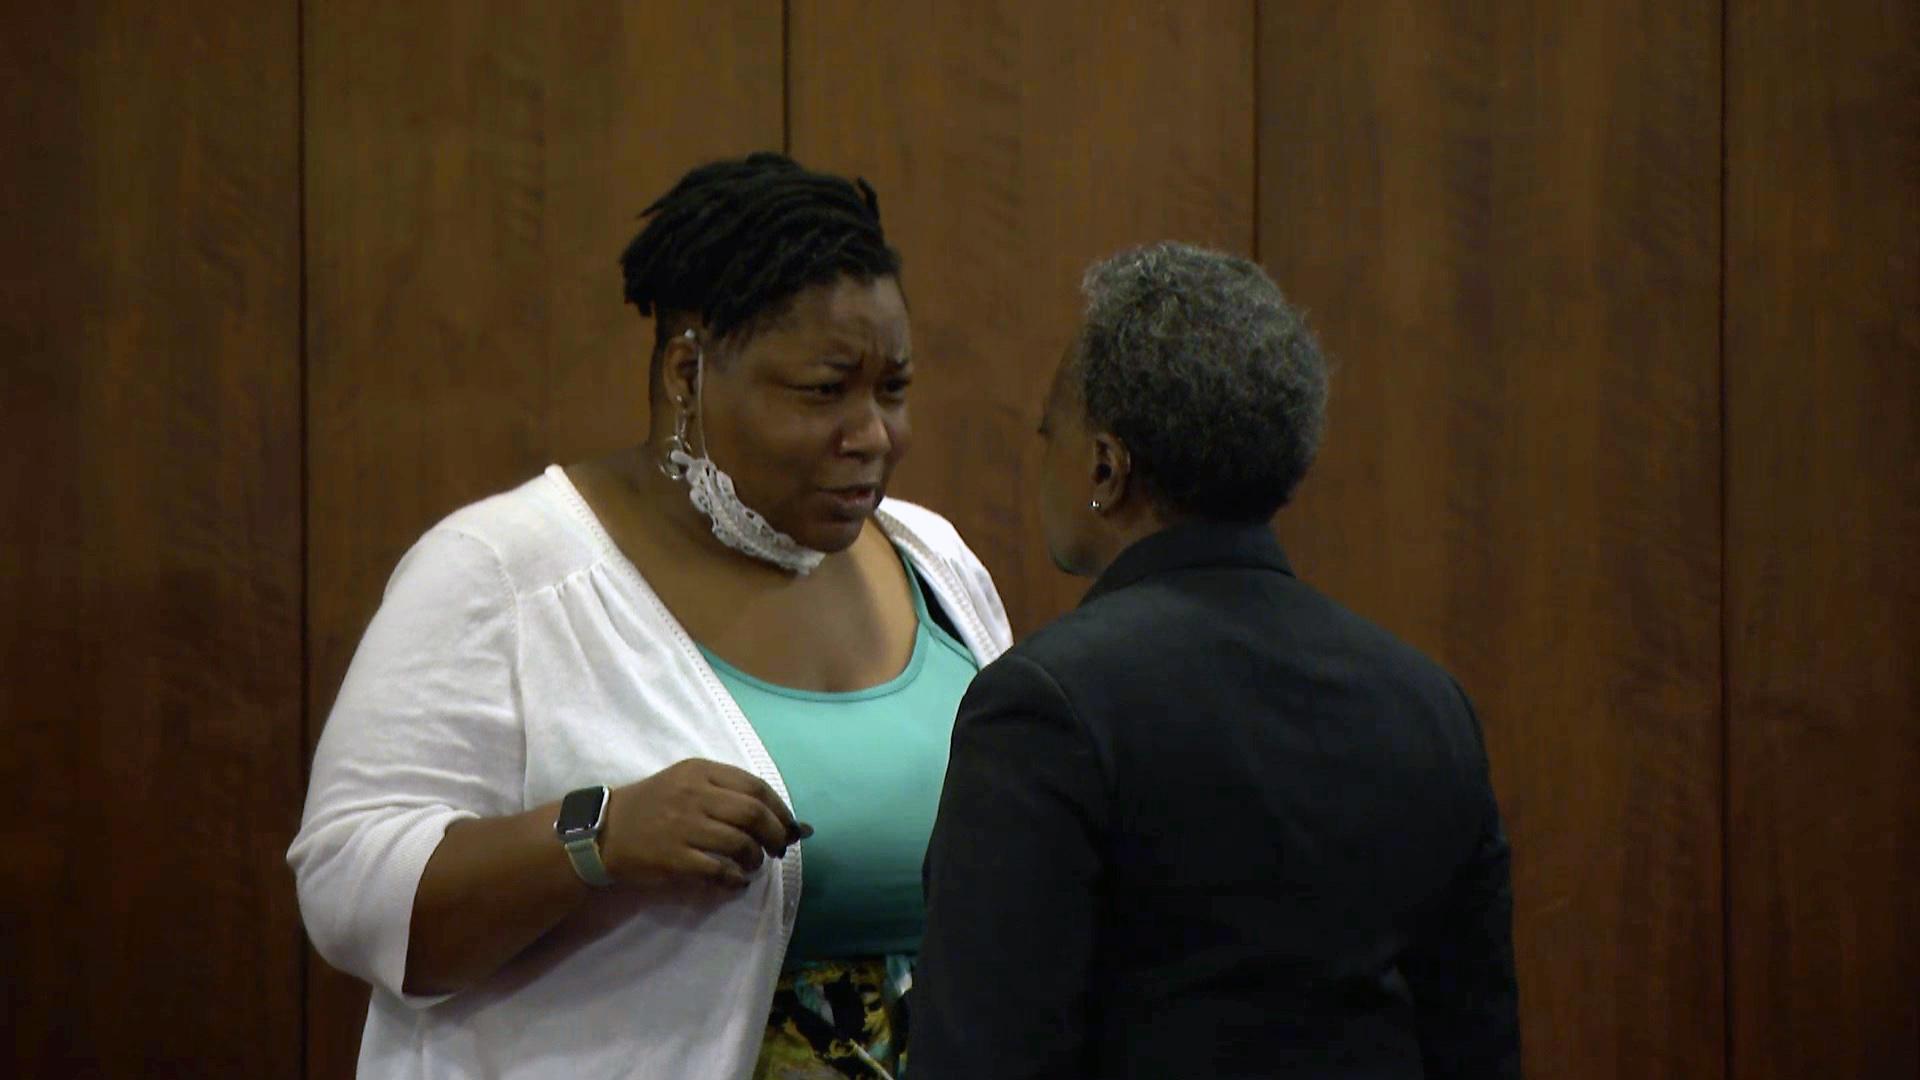 Ald. Jeanette Taylor (20th Ward), left, speaks with Mayor Lori Lightfoot at a City Council meeting Wednesday, June 23, 2021. (WTTW News)